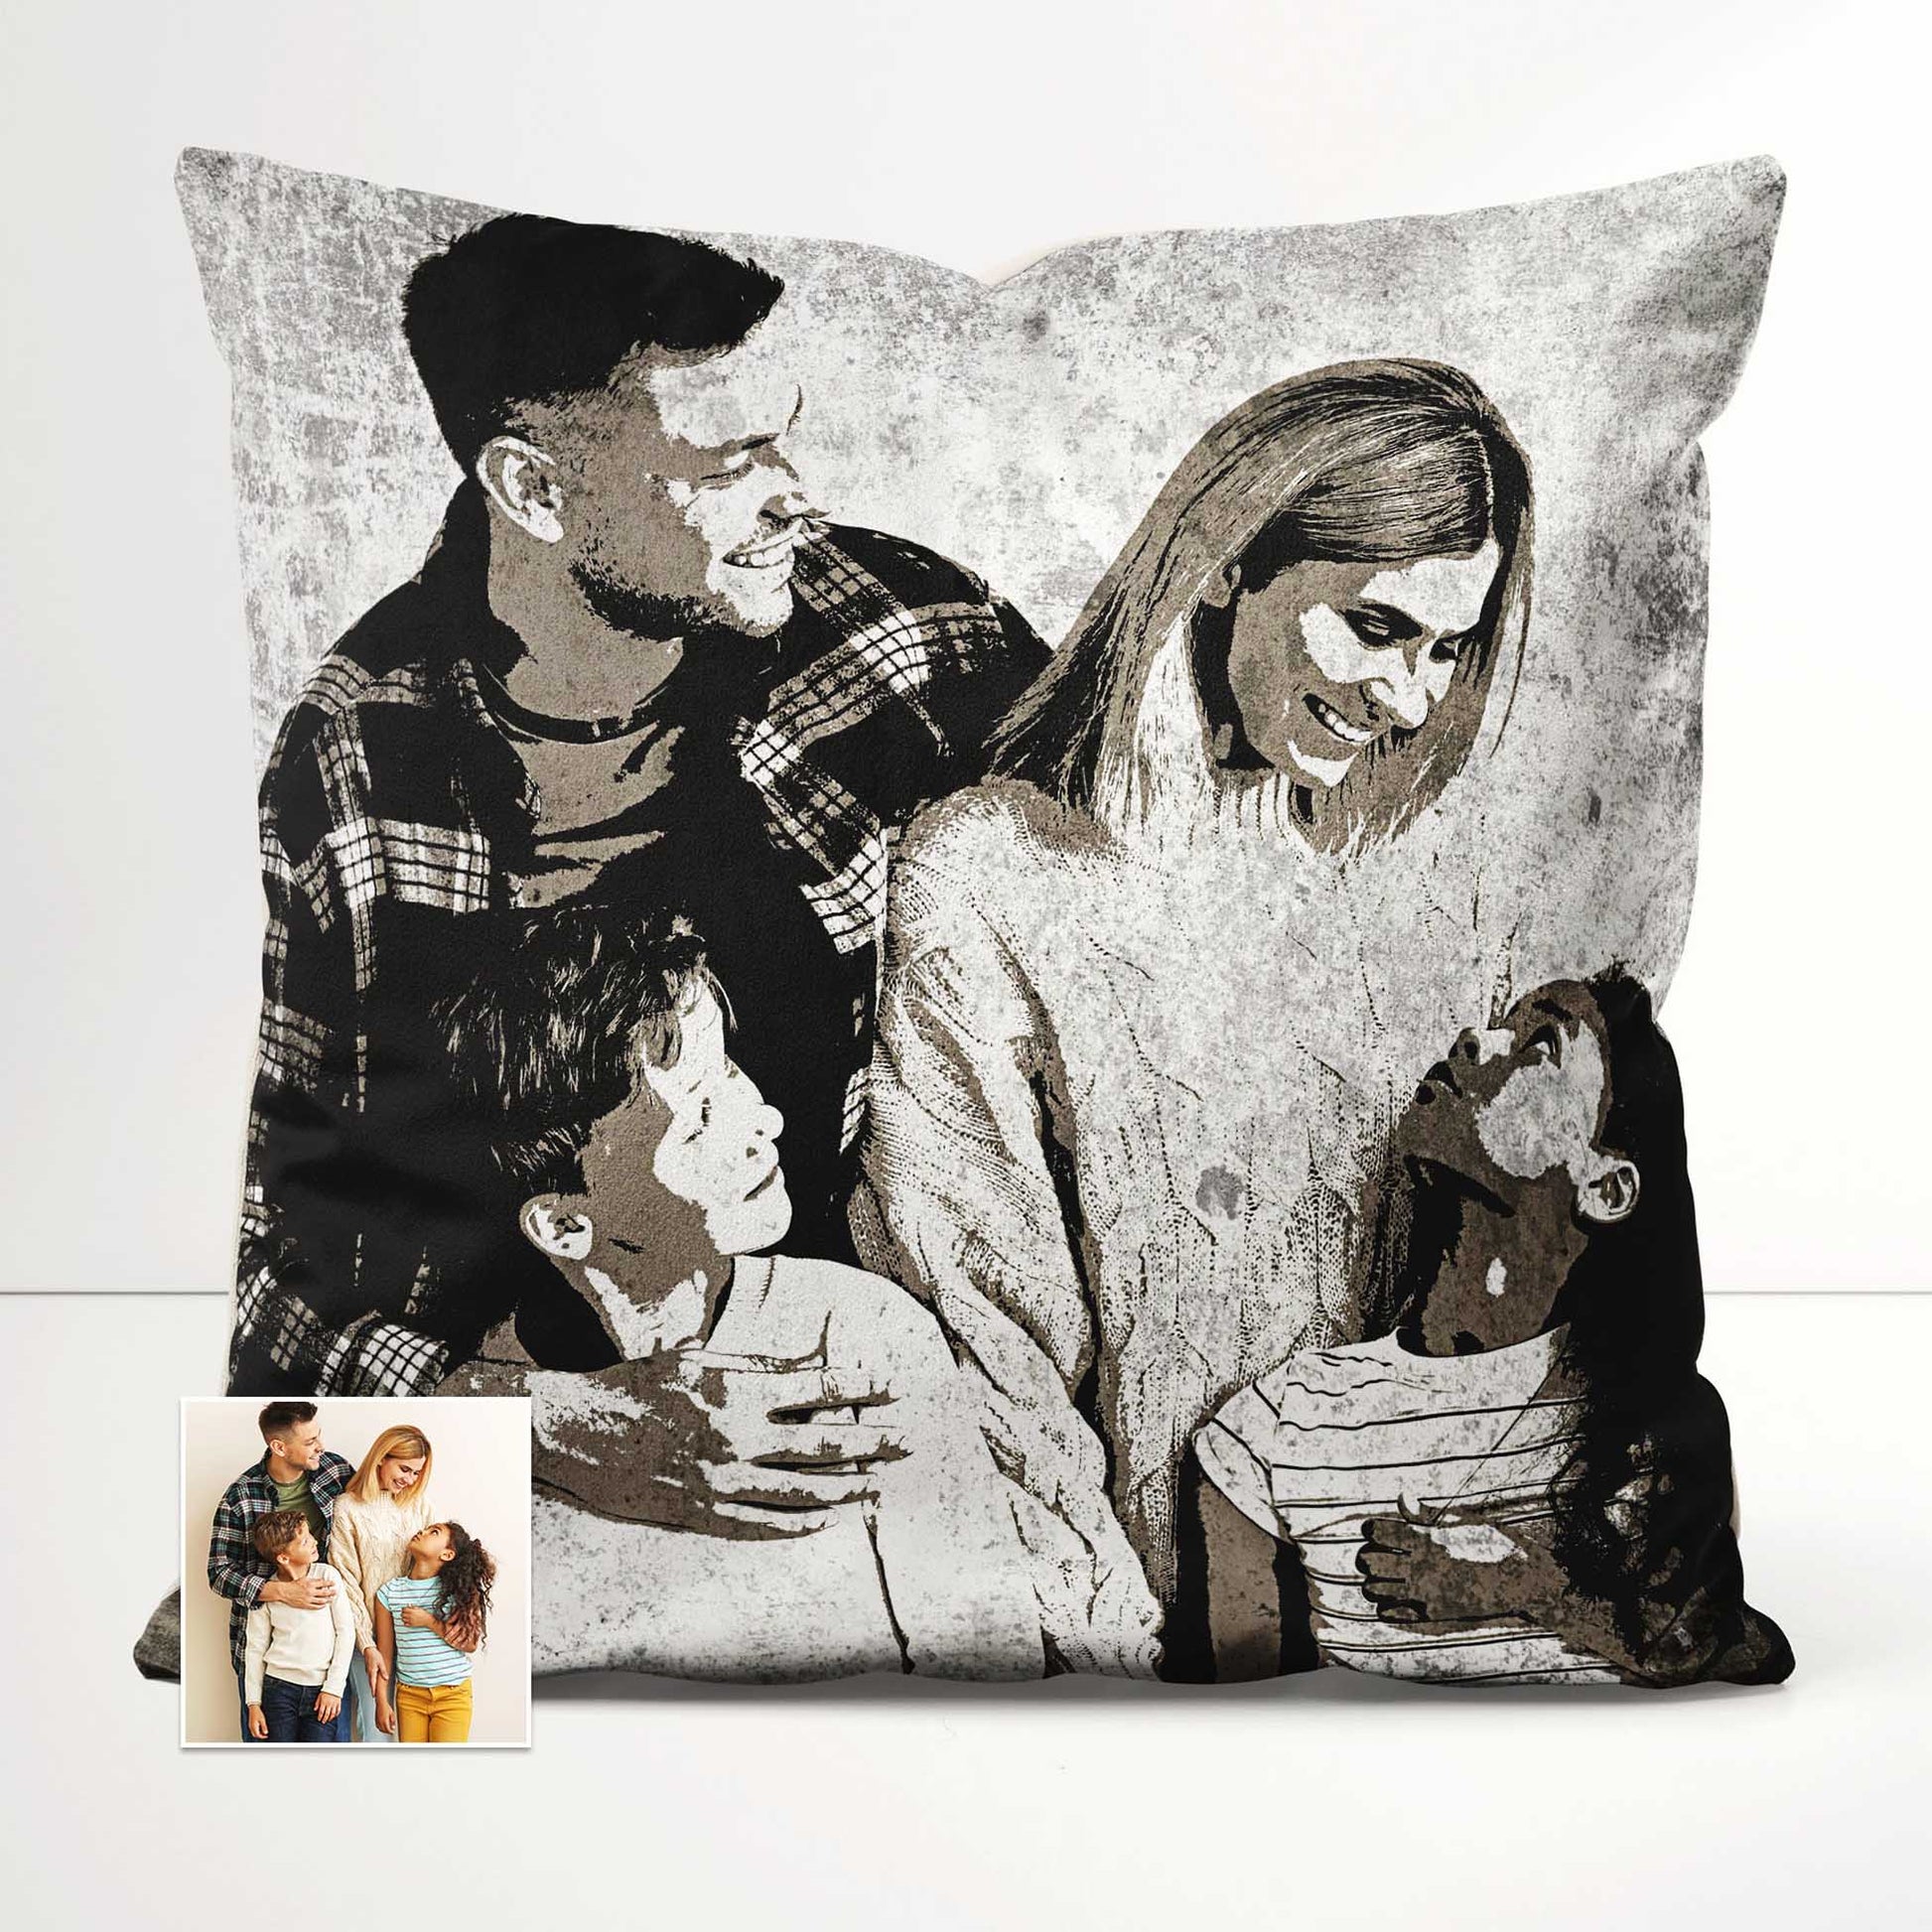 Add a touch of urban art to your living space with the Personalised Black & White Street Art Cushion. Made from soft velvet, this elegant cushion features a graffiti-inspired print, bringing a cool and contemporary vibe to your home